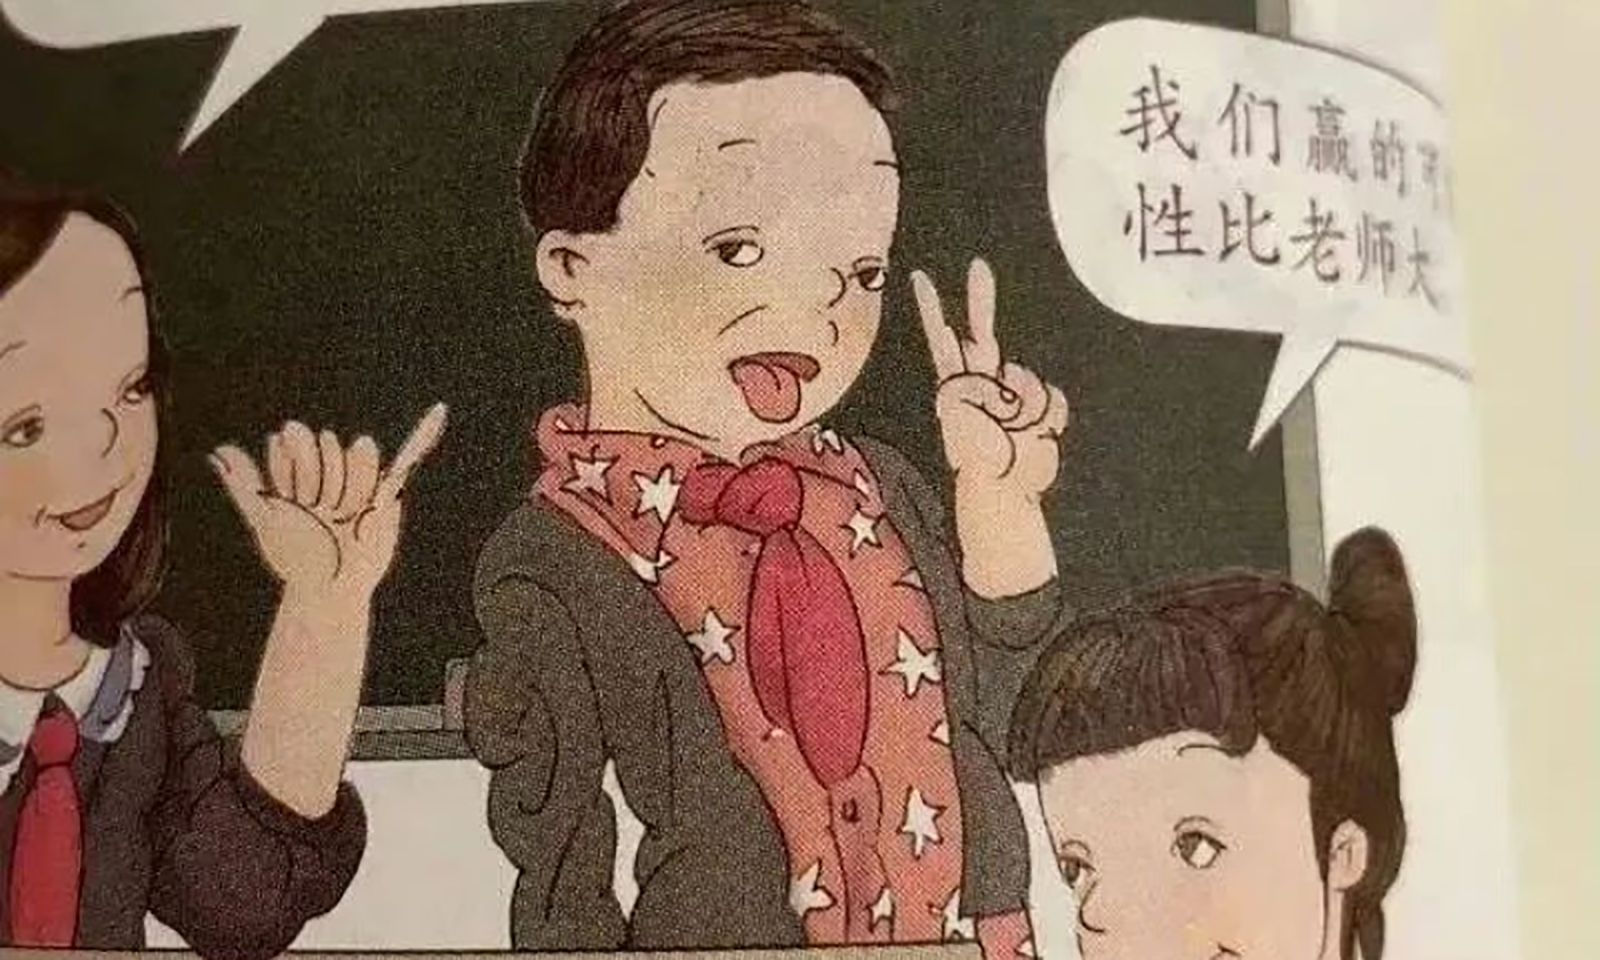 Math books outrage China with 'ugly, sexually suggestive, pro-American'  images | CNN